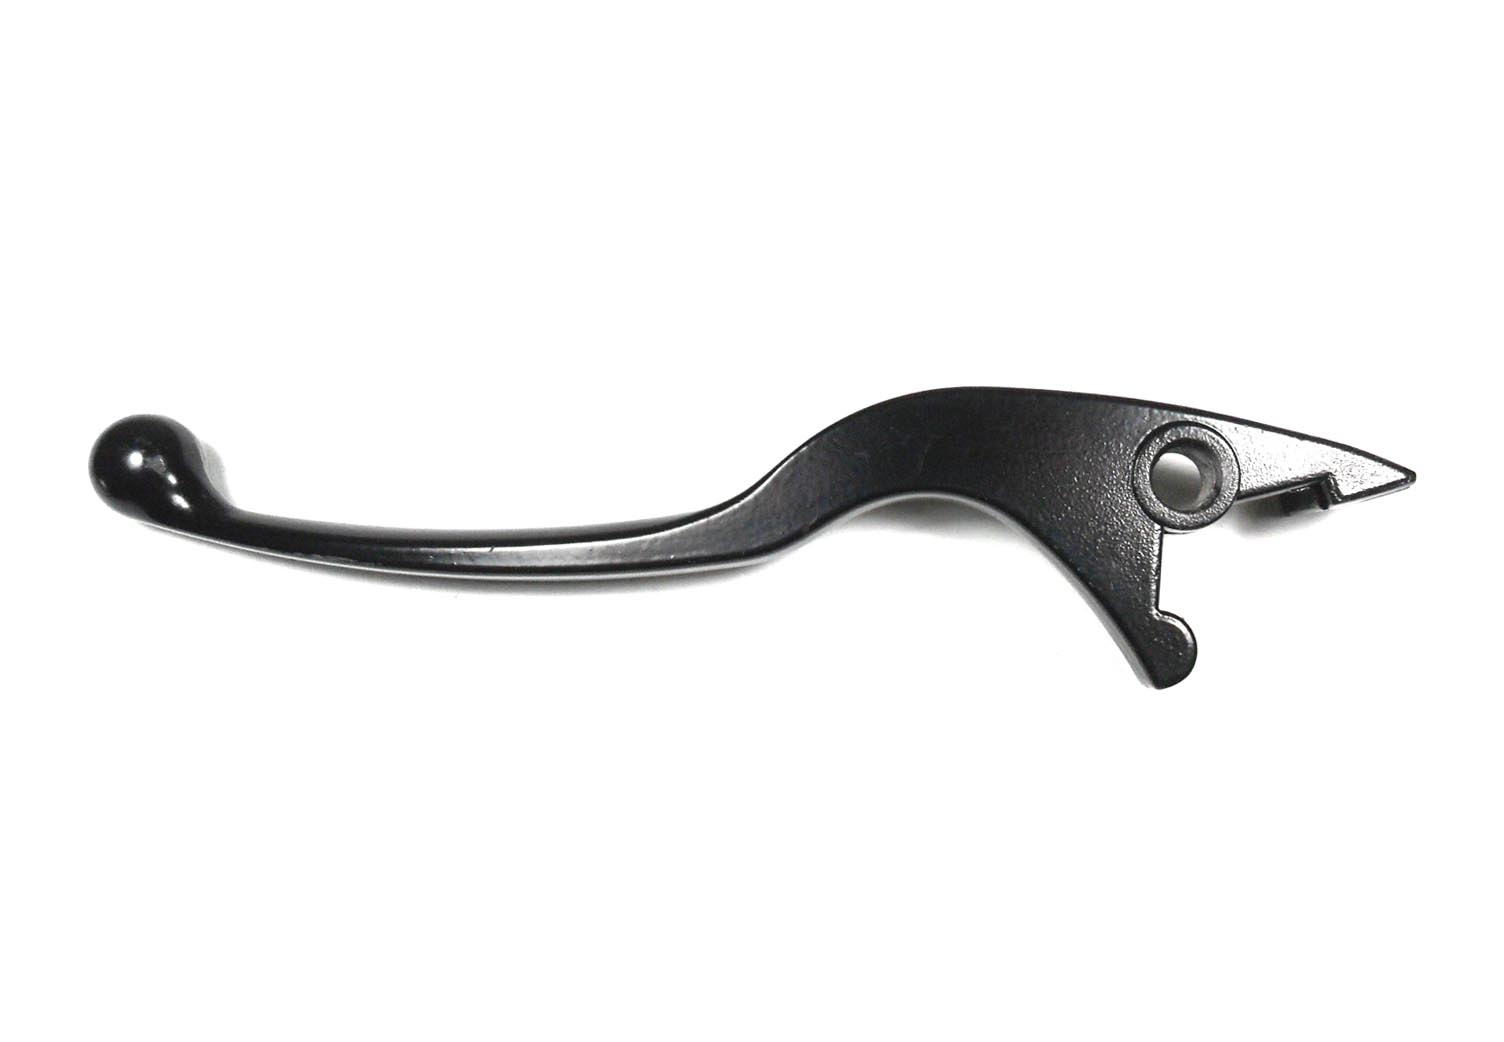 BRAKE LEVER (Left Hand) Fits many ATVs & Scooters L=191mm Bolt Hole ID=8mm Thick=12mm